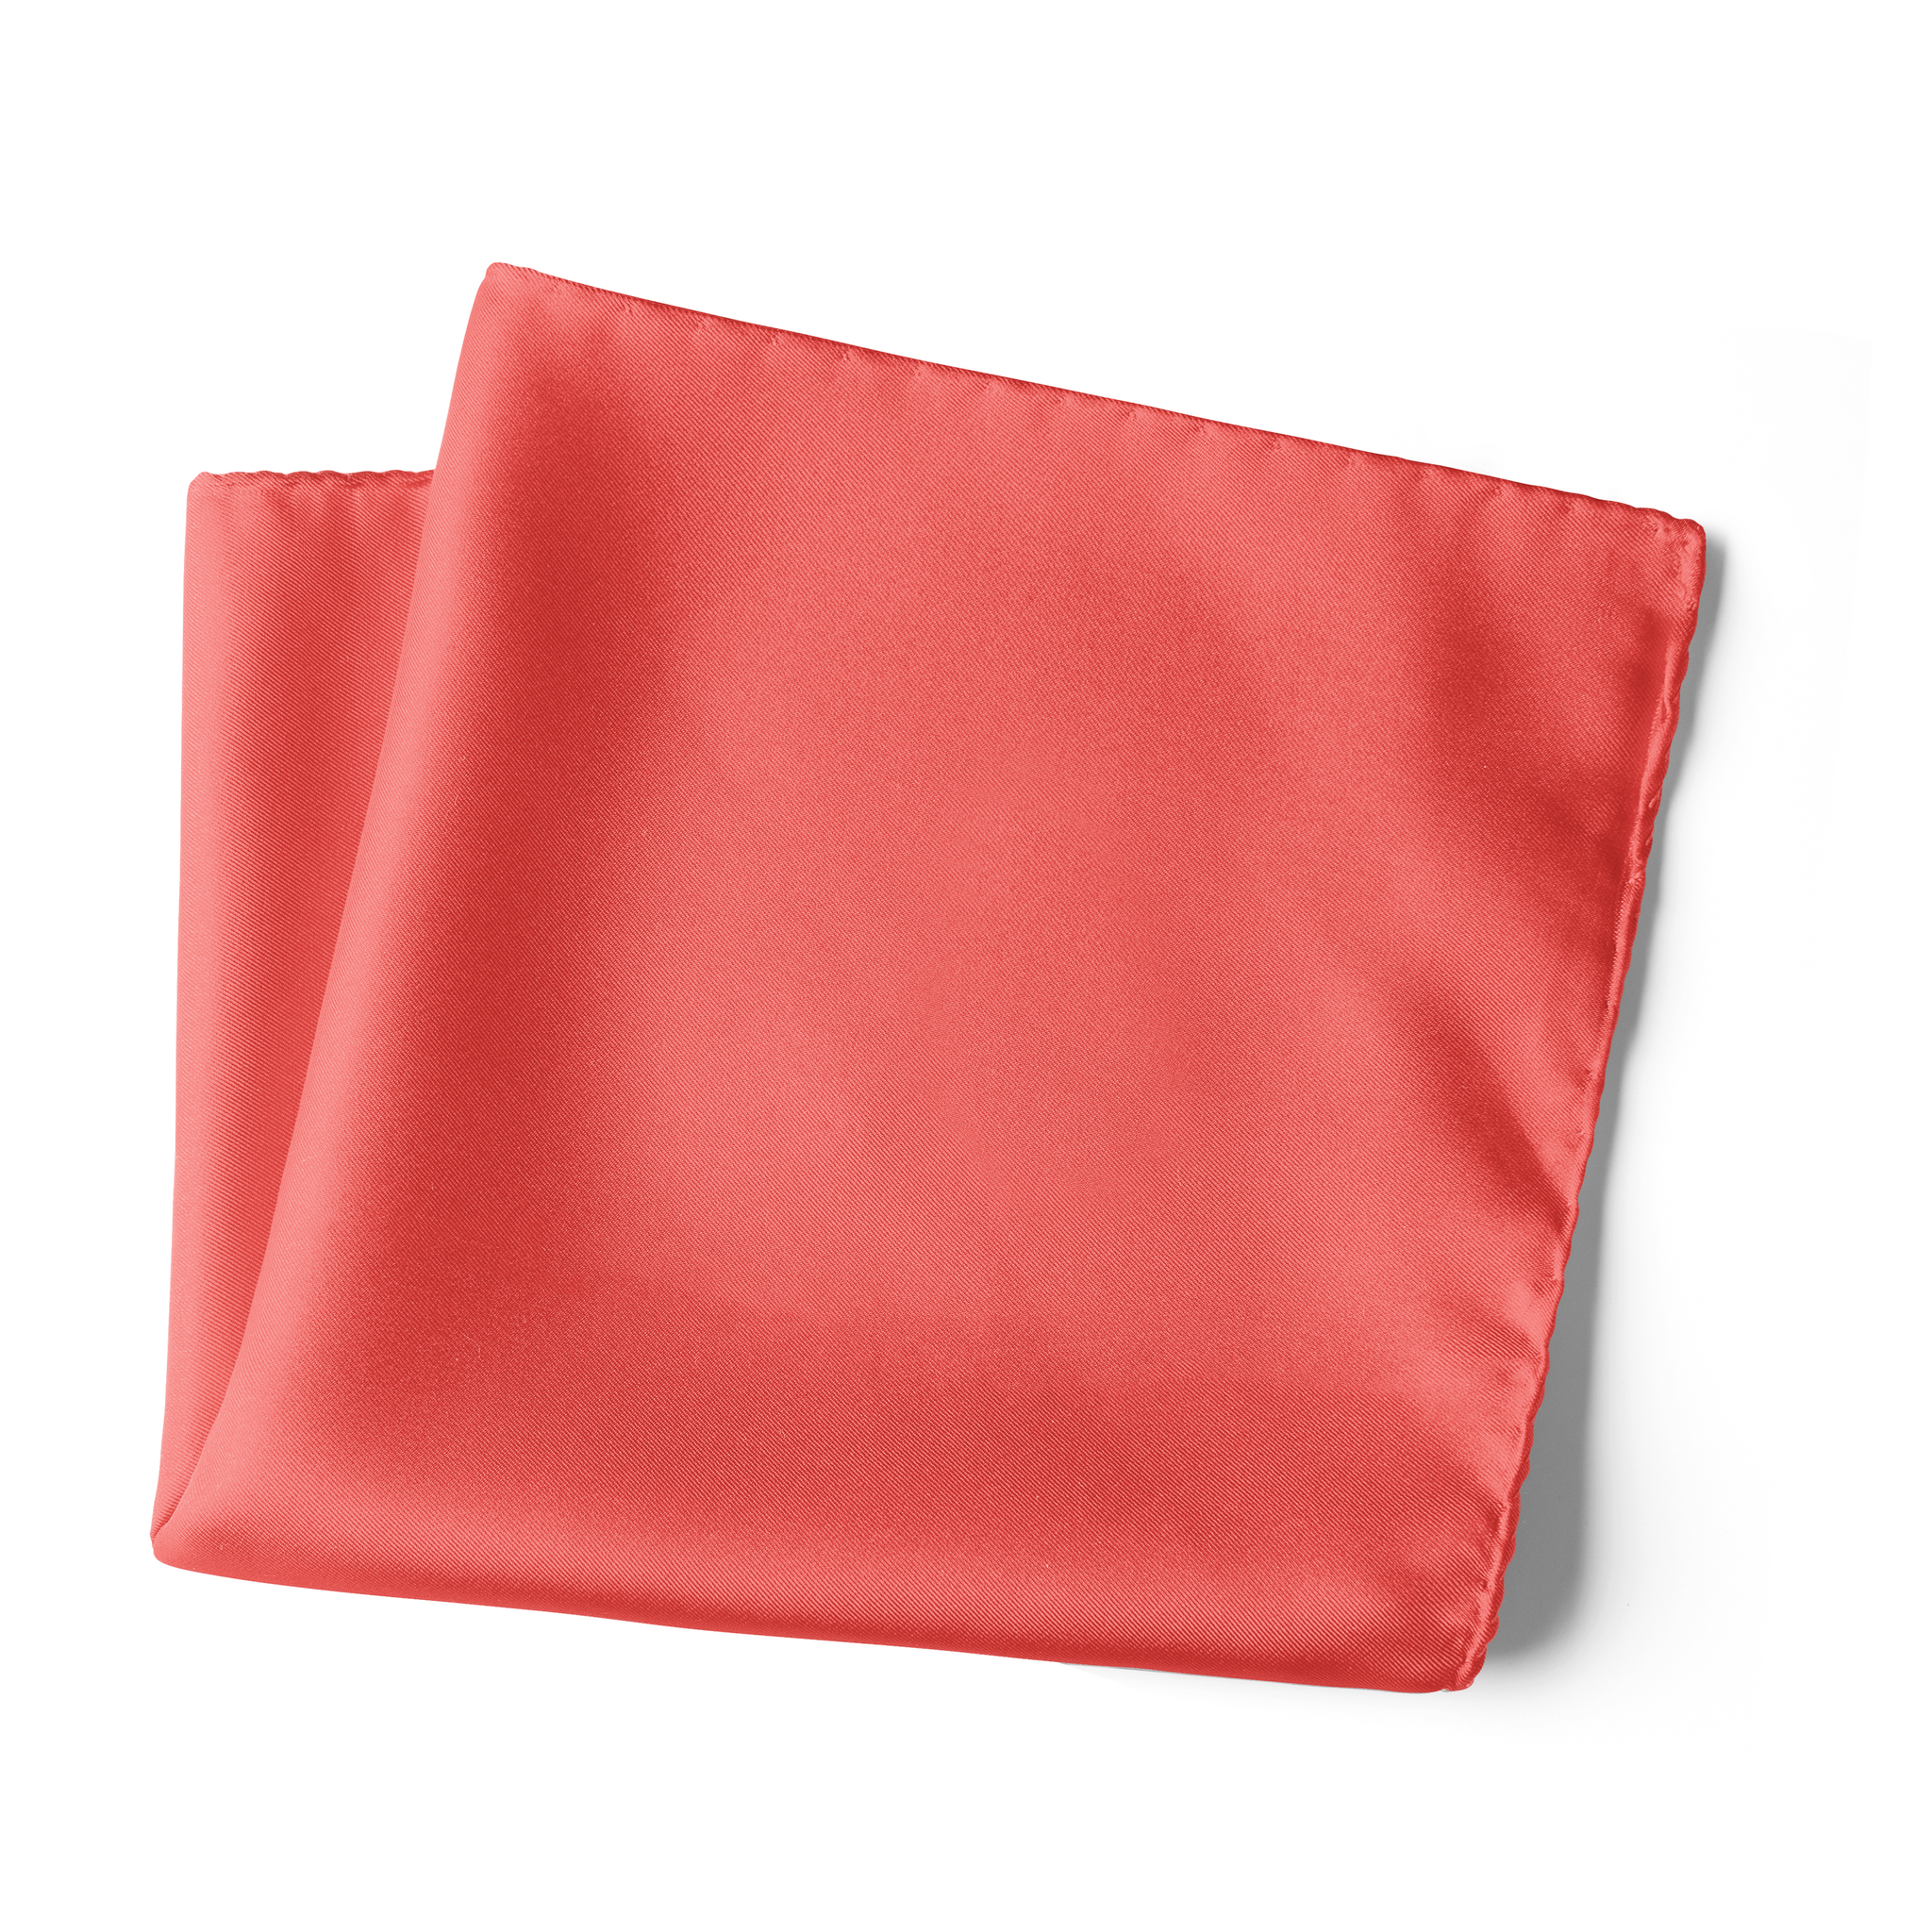 Chokore Madder Pure Silk Pocket Square, from the Solids Line